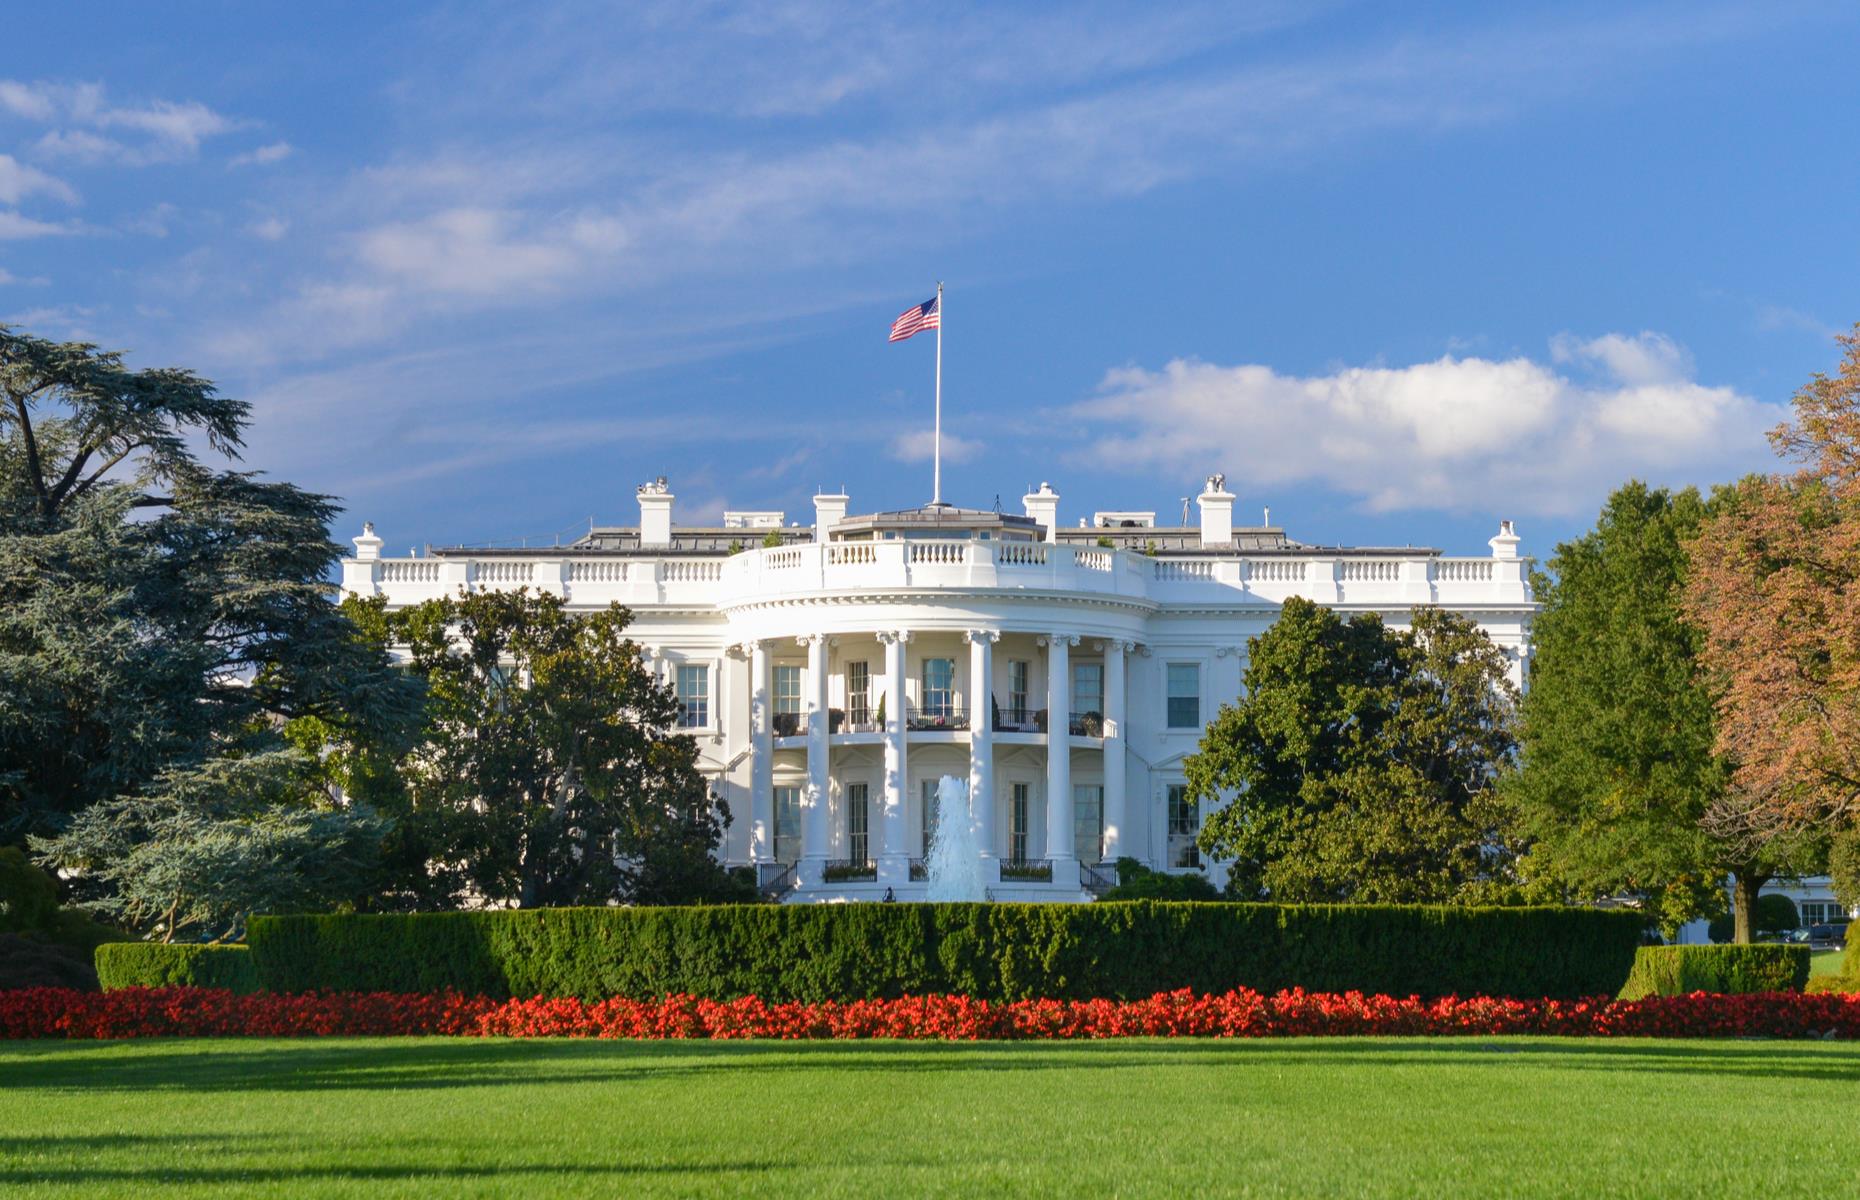 <p>One of the most famous political buildings in the world, The White House has remained a symbol of the American government since its first occupation by President John Adams in 1800. <a href="https://www.whitehouse.gov/about-the-white-house/tours-events/">Tours</a> are tricky to arrange (you must book through a member of Congress or your embassy), but the White House Visitor Center offers a comprehensive overview of the history and significance of this landmark site. Check <a href="https://www.nps.gov/whho/planyourvisit/white-house-visitor-center.htm">the NPS website</a> for up-to-date information on the center's current opening status.</p>